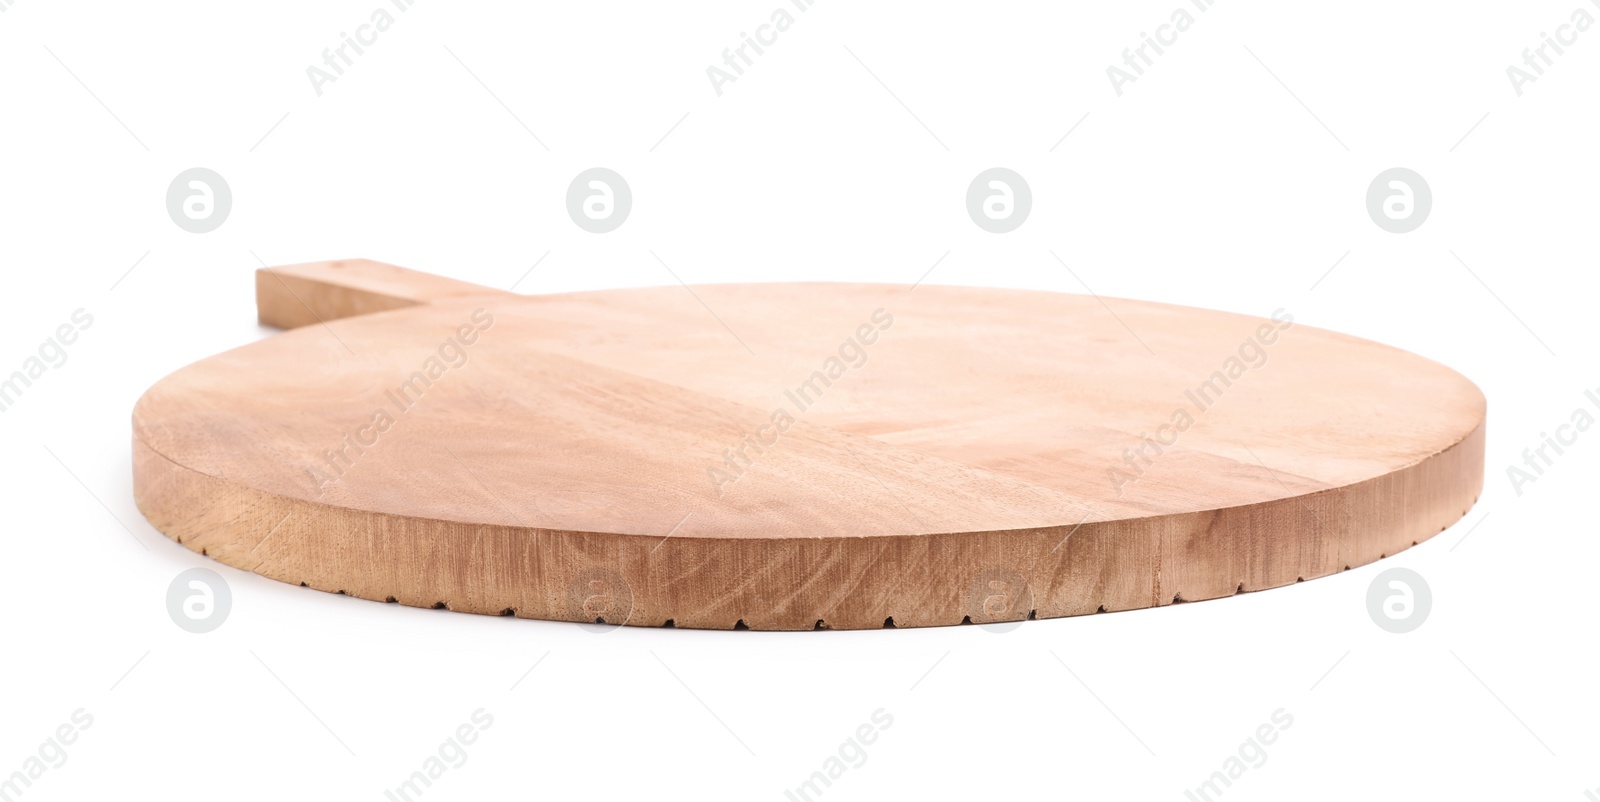 Photo of Round wooden cutting board isolated on white